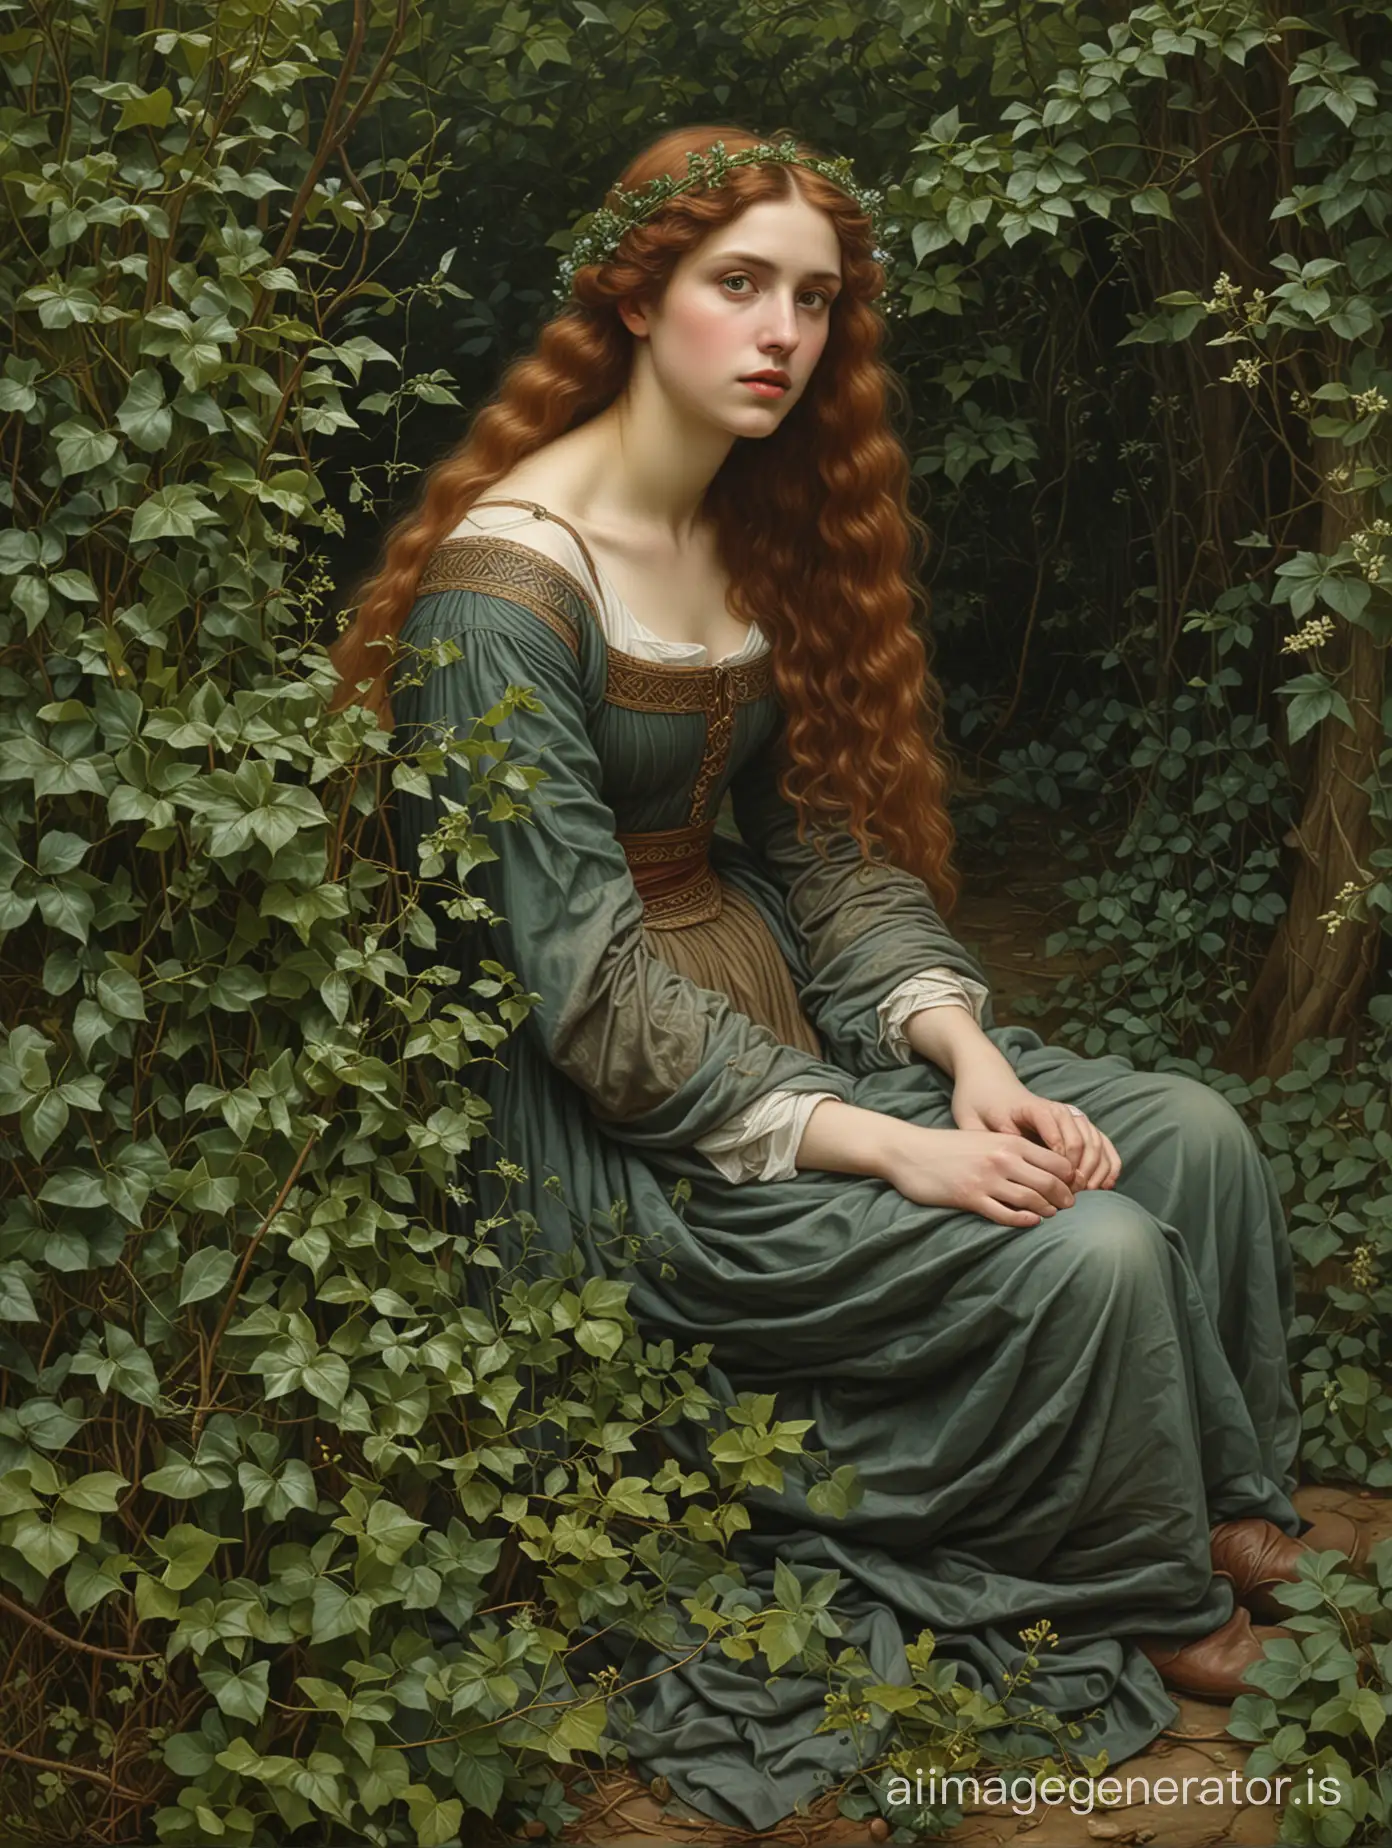 PreRaphaelite-Painting-of-a-Young-Woman-Amidst-Ivy